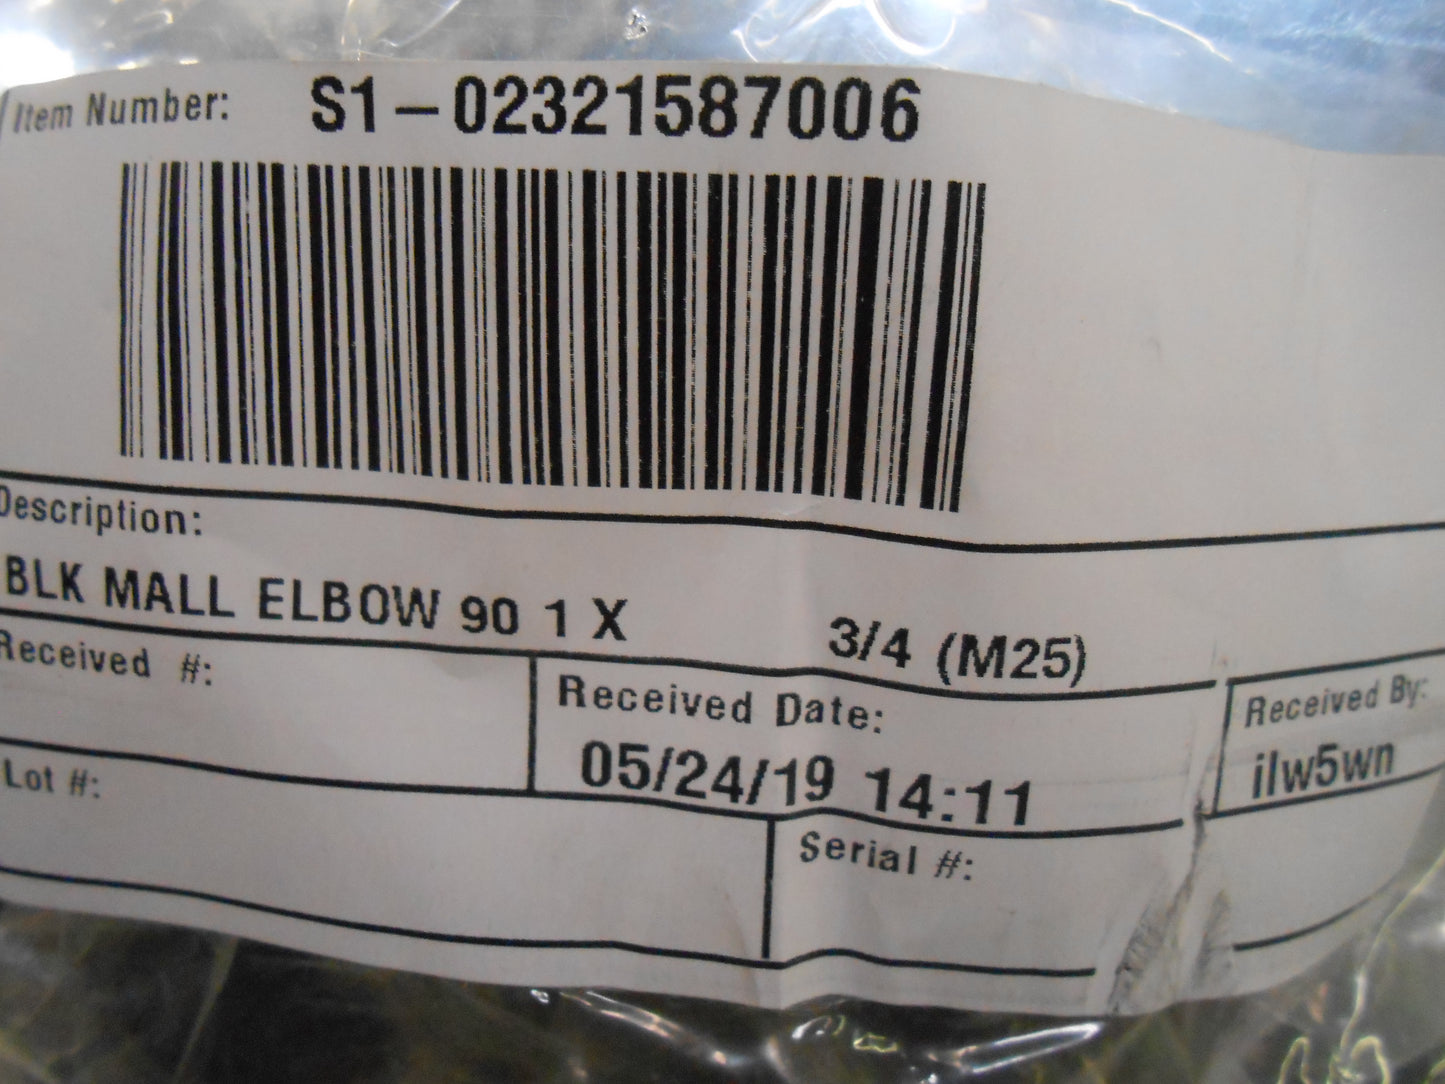 1" X 3/4" BLK MALL ELBOW 90 DEGREE (SOLD AS A BAG OF 10)